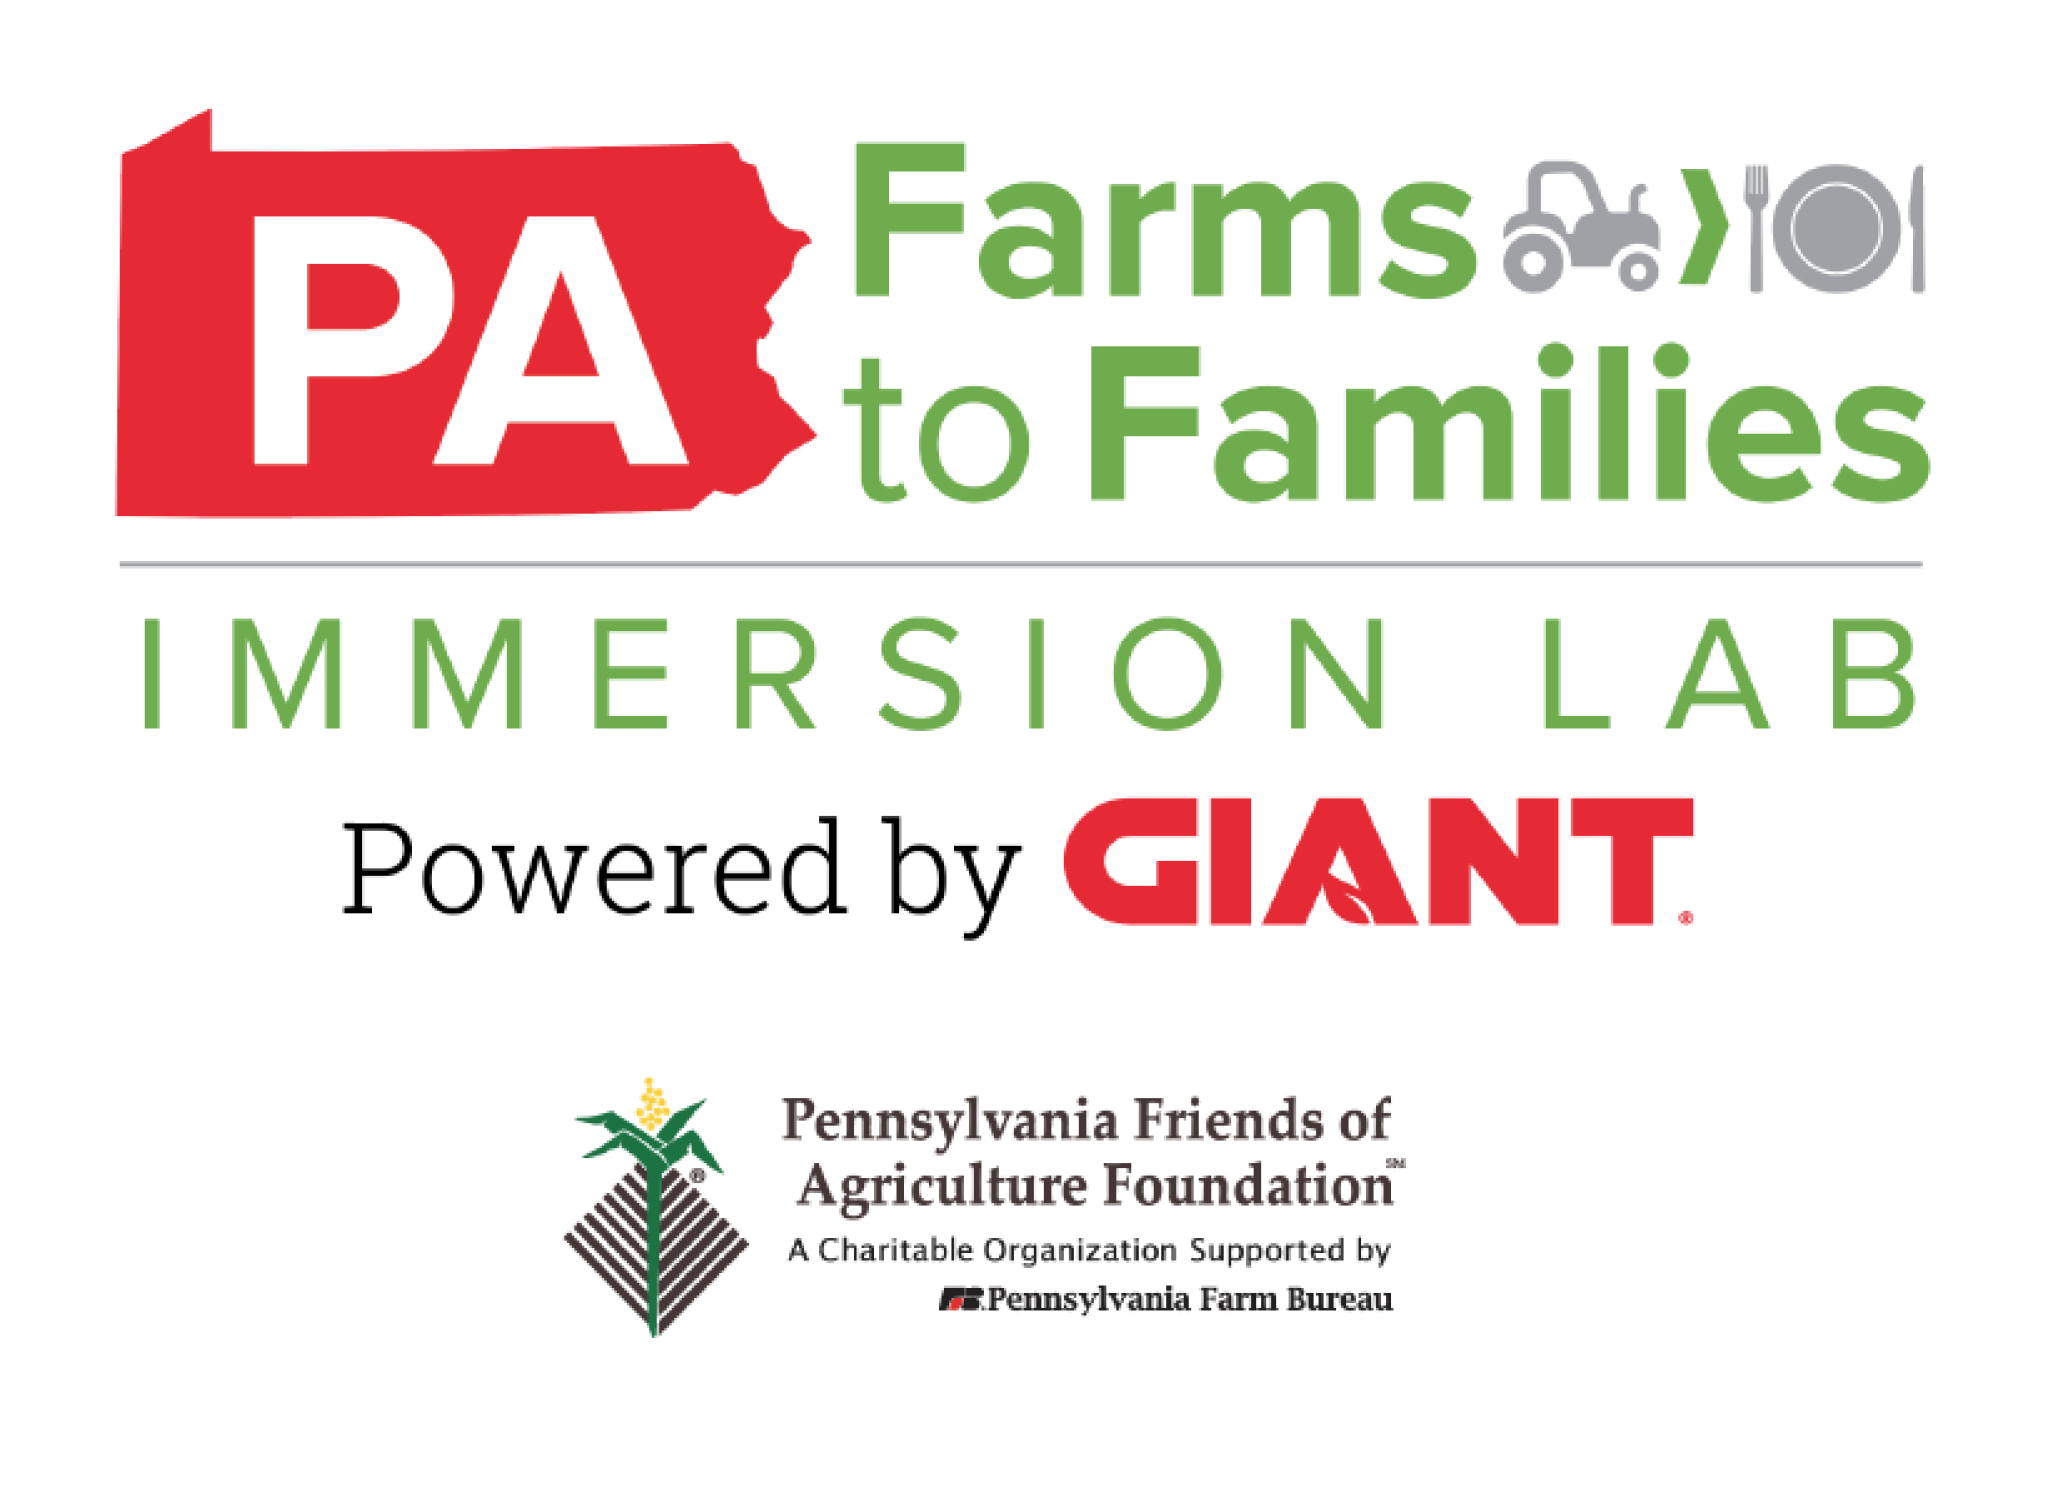 Foundation agriculture immersion lab and GIANT logo